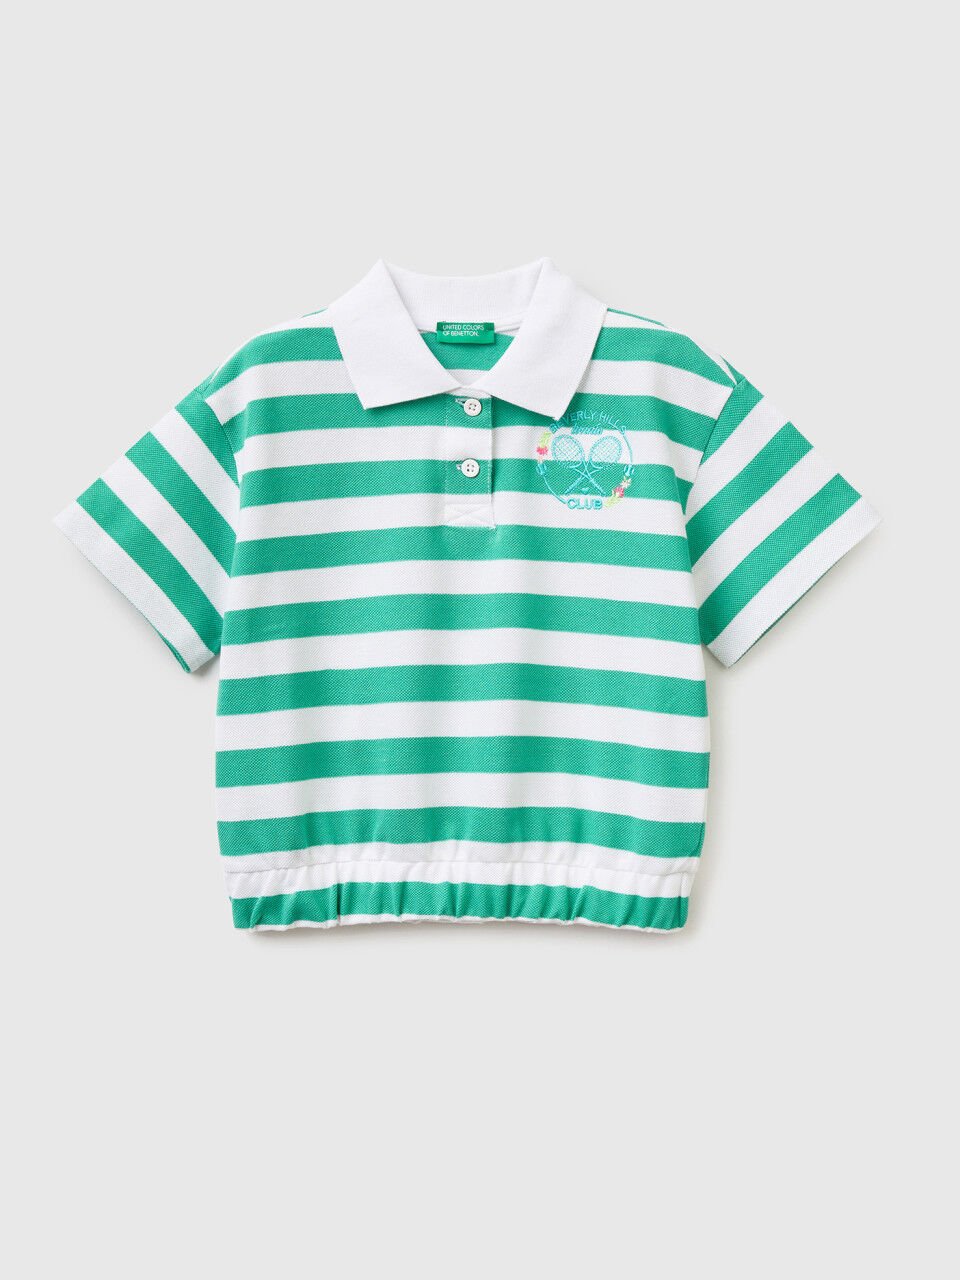 Junior Girls' T-shirts and Shirts Collection 2023 | Benetton